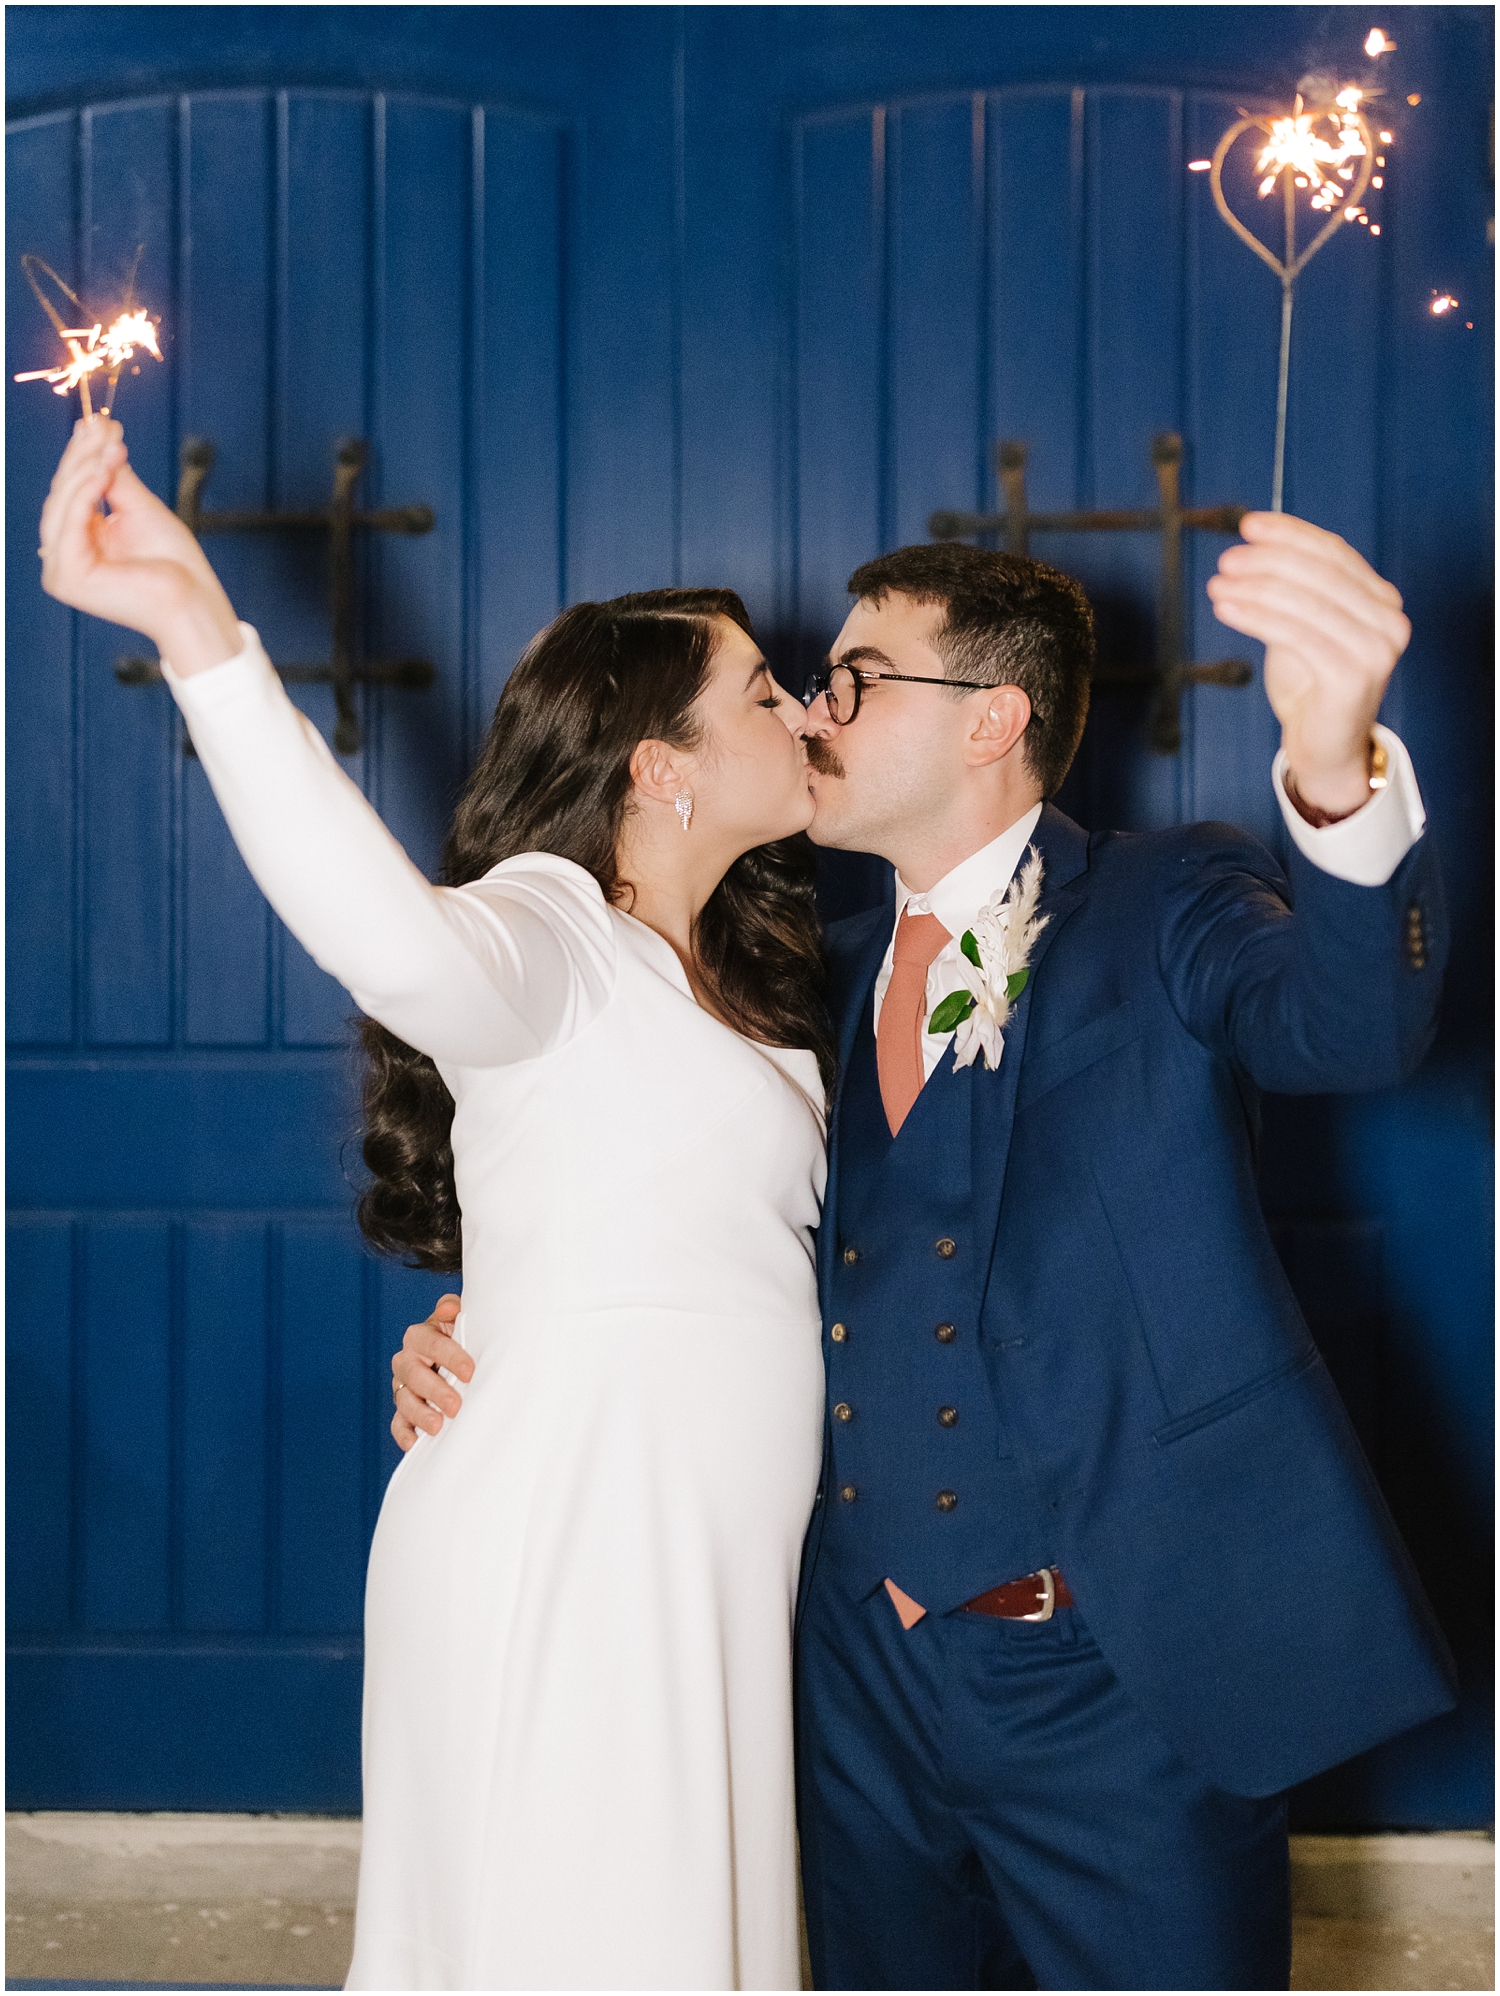 Couple says goodbye to friends on their wedding day with sparklers at The Rialto Theatre in Tampa, FL.